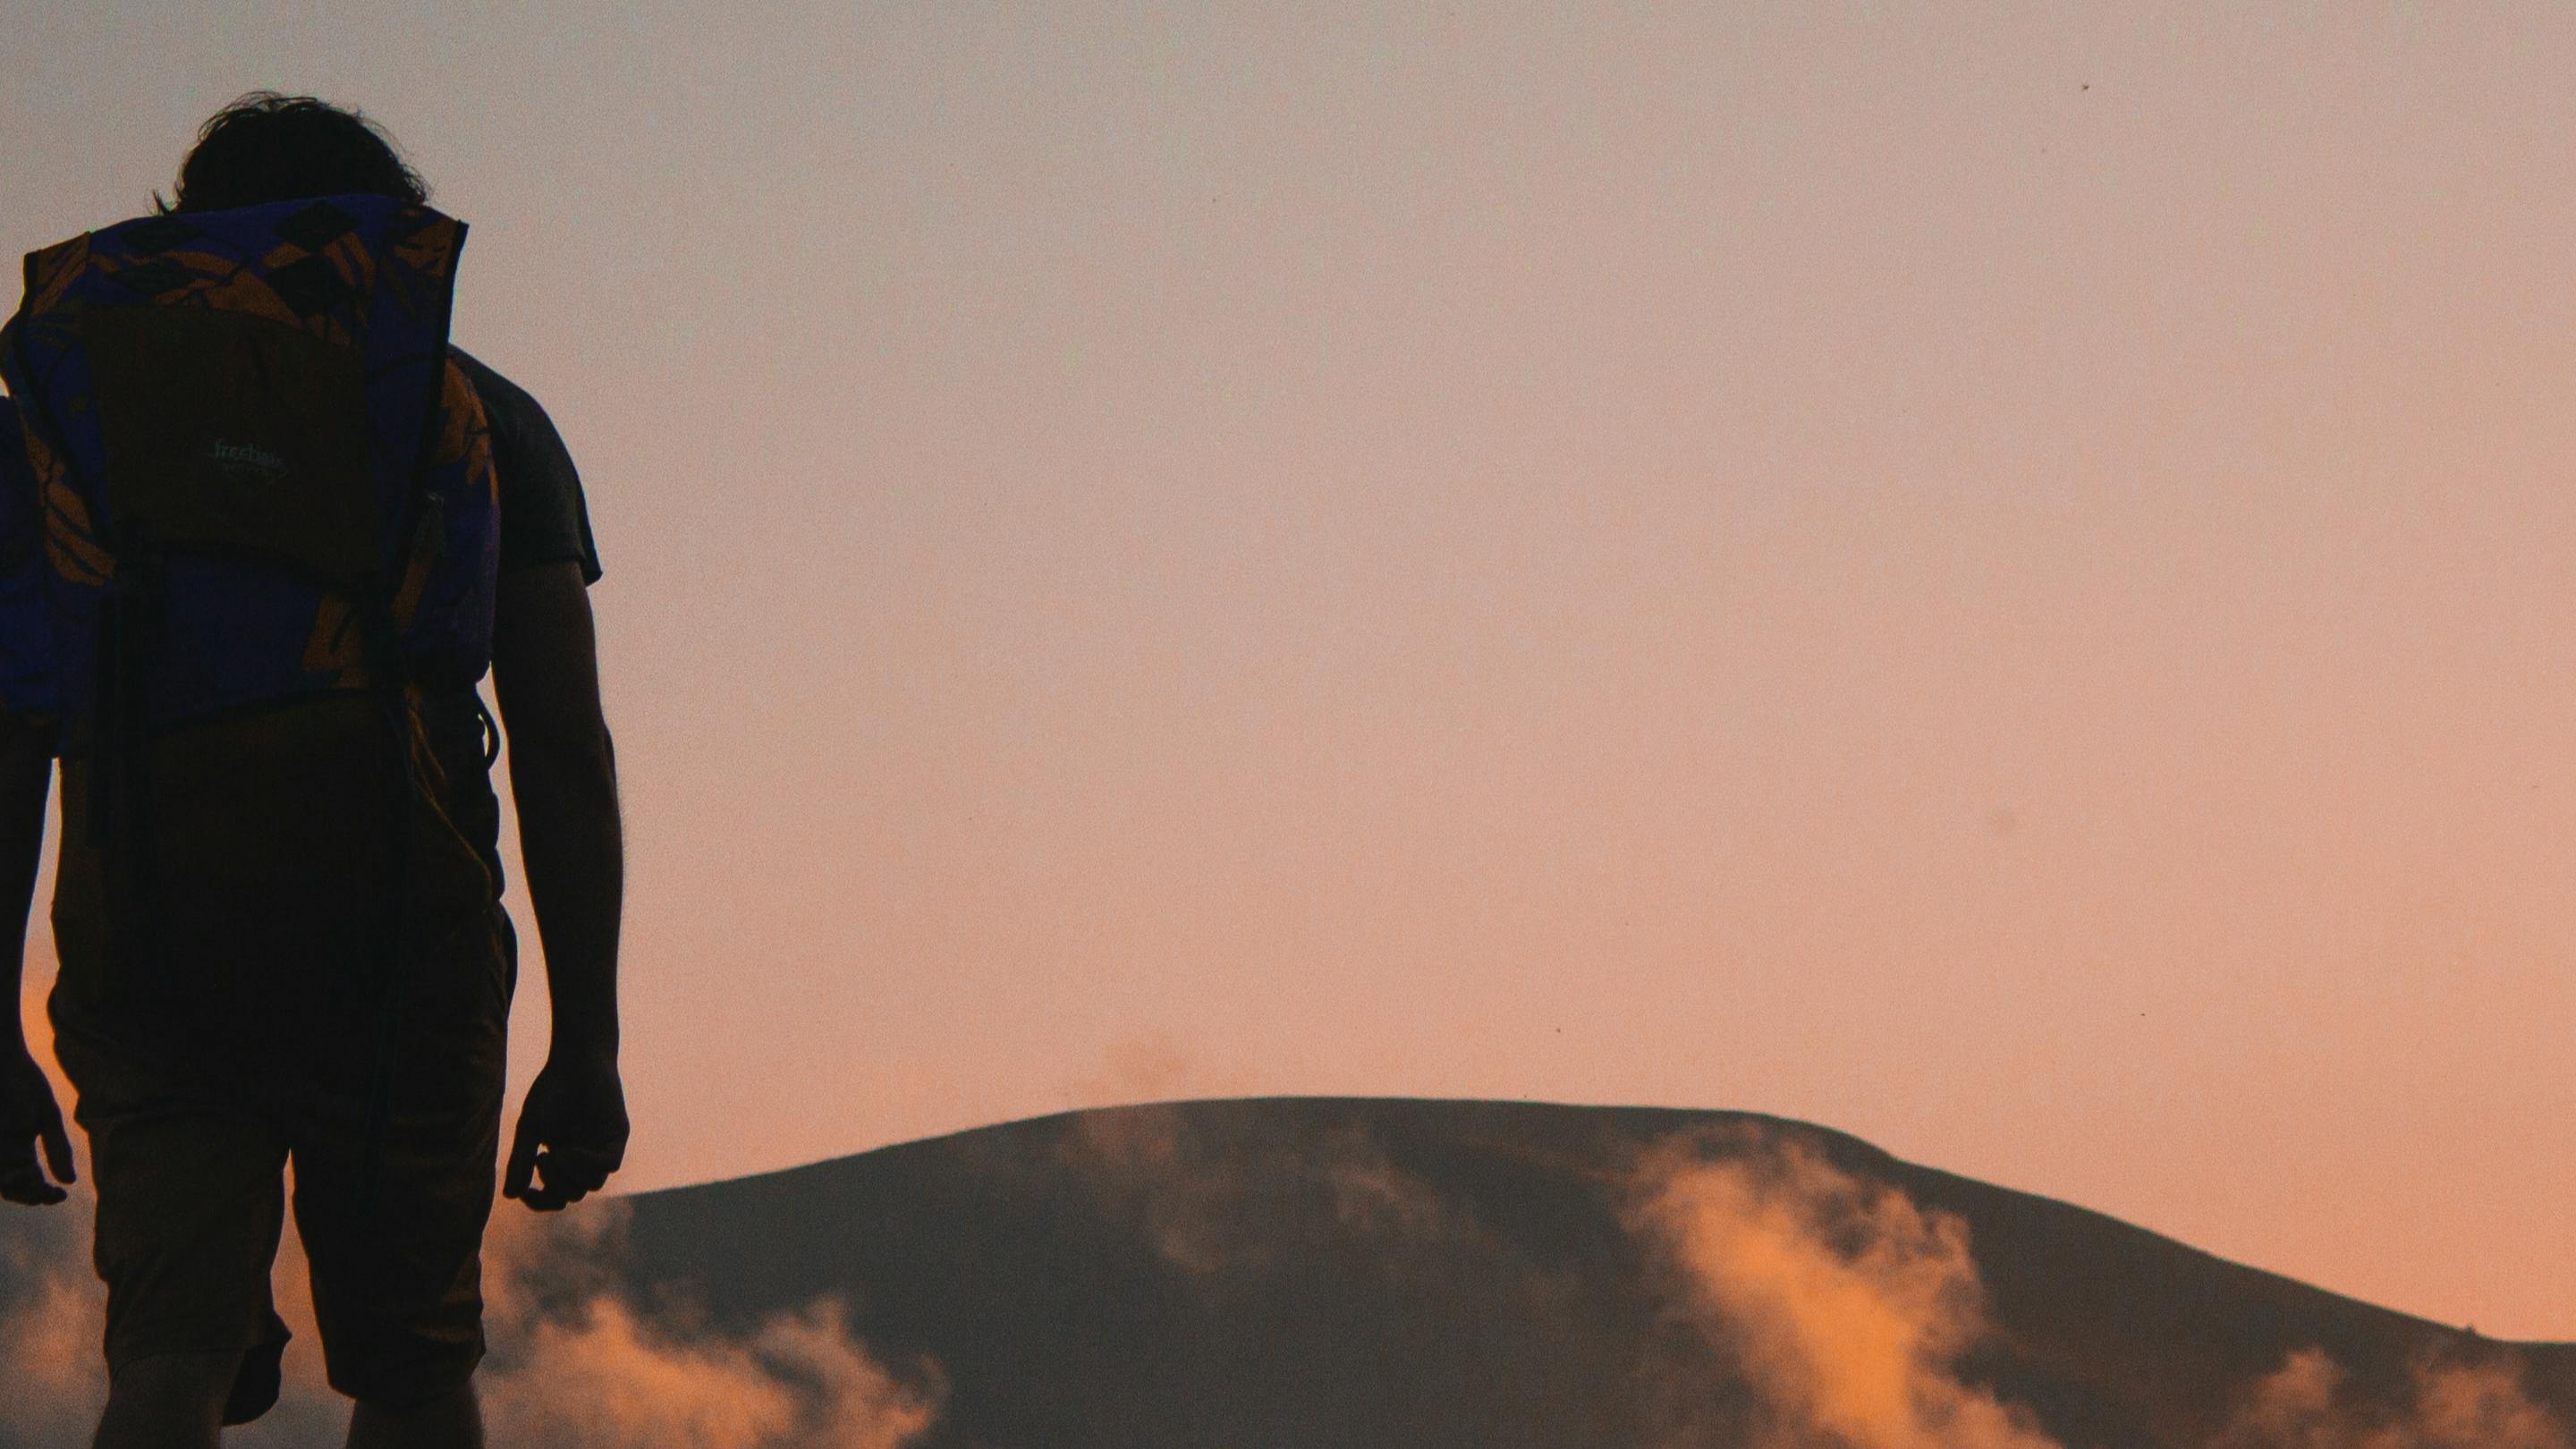 A person with a backpack is silhouetted from behind with sunset hills in front of him.